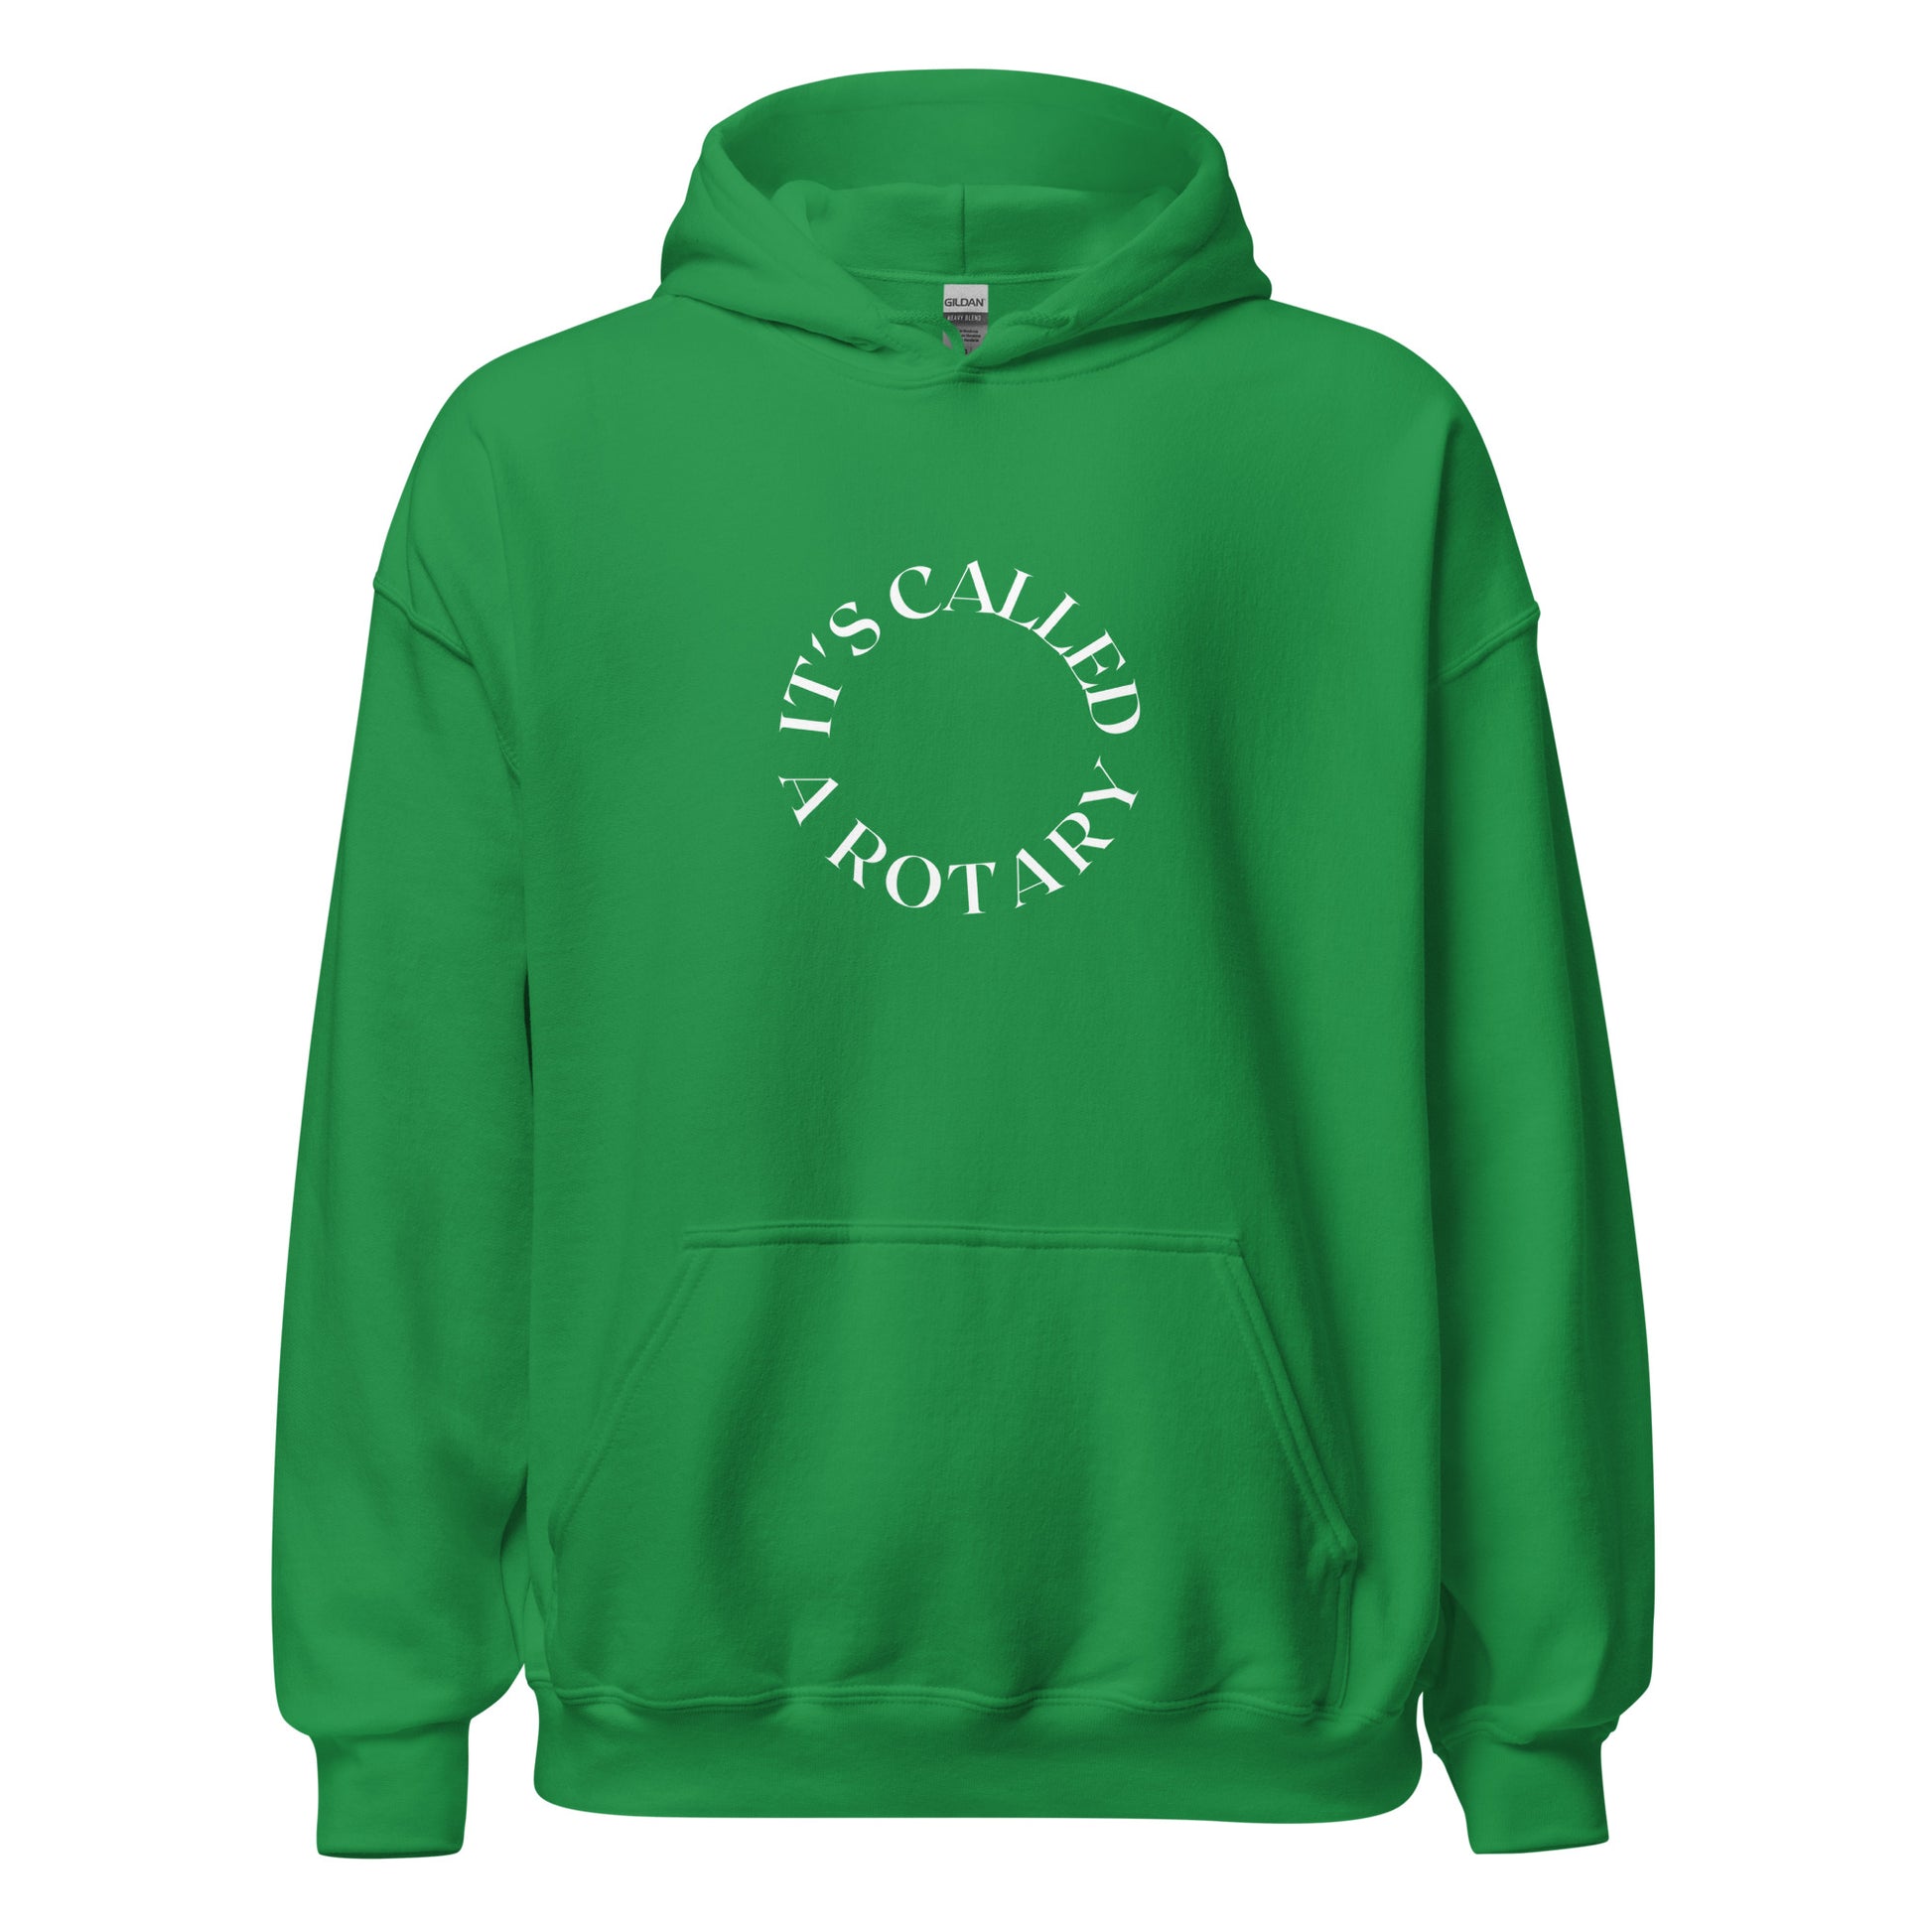 green hoodie that saying "it's called a rotary" in white lettering shaped in a circle